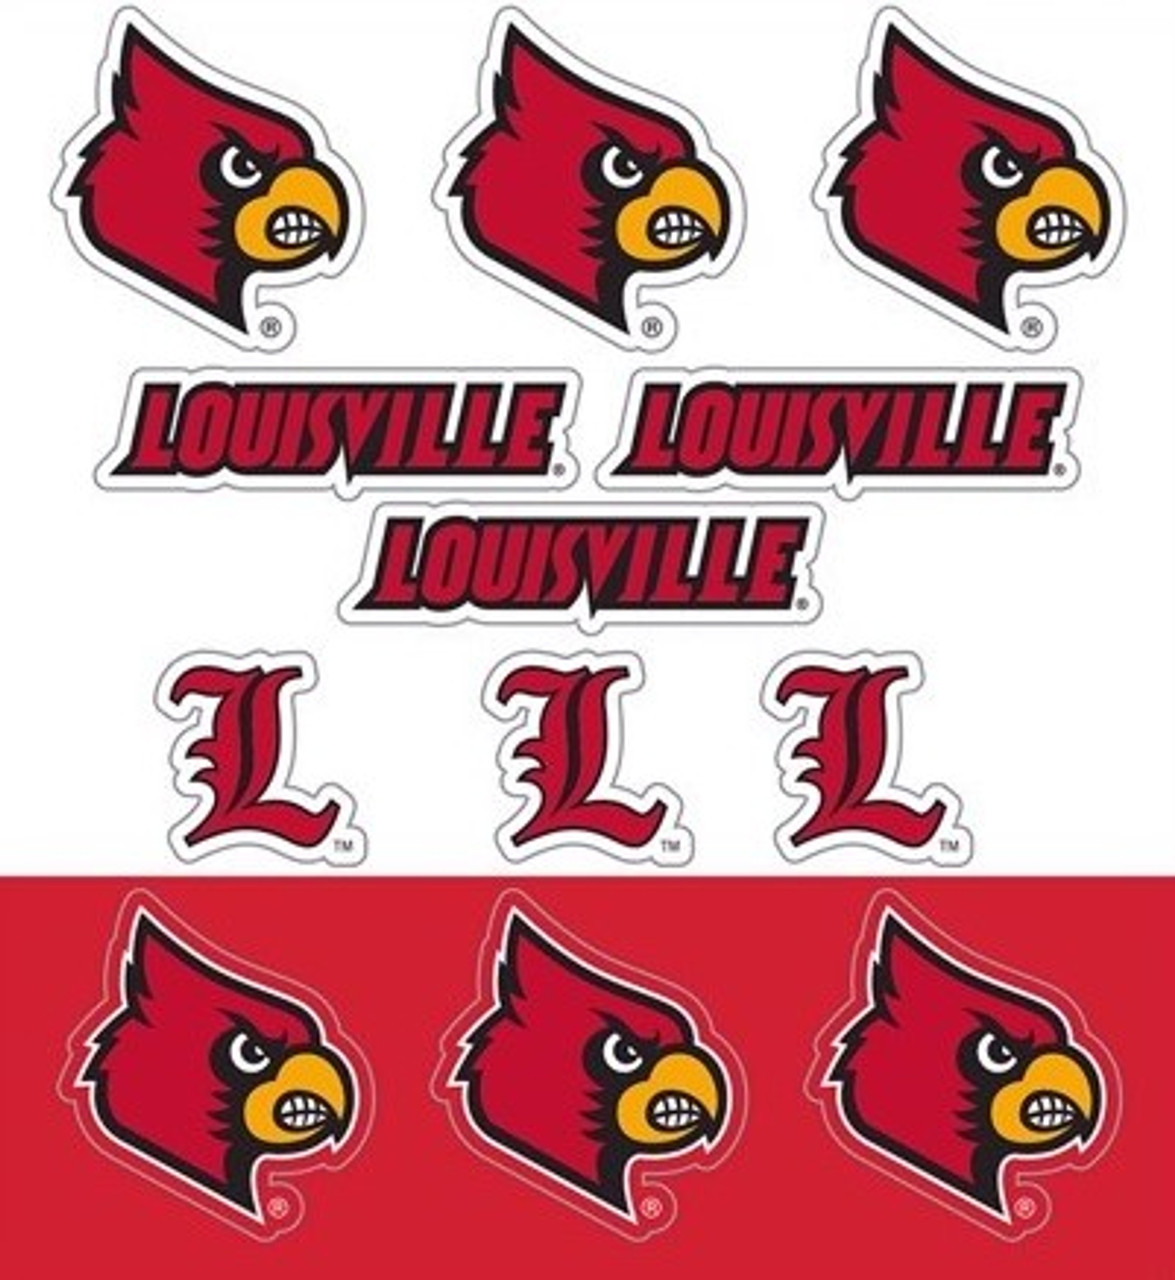 Officially Licensed NCAA Louisville Cardinals Football Rug